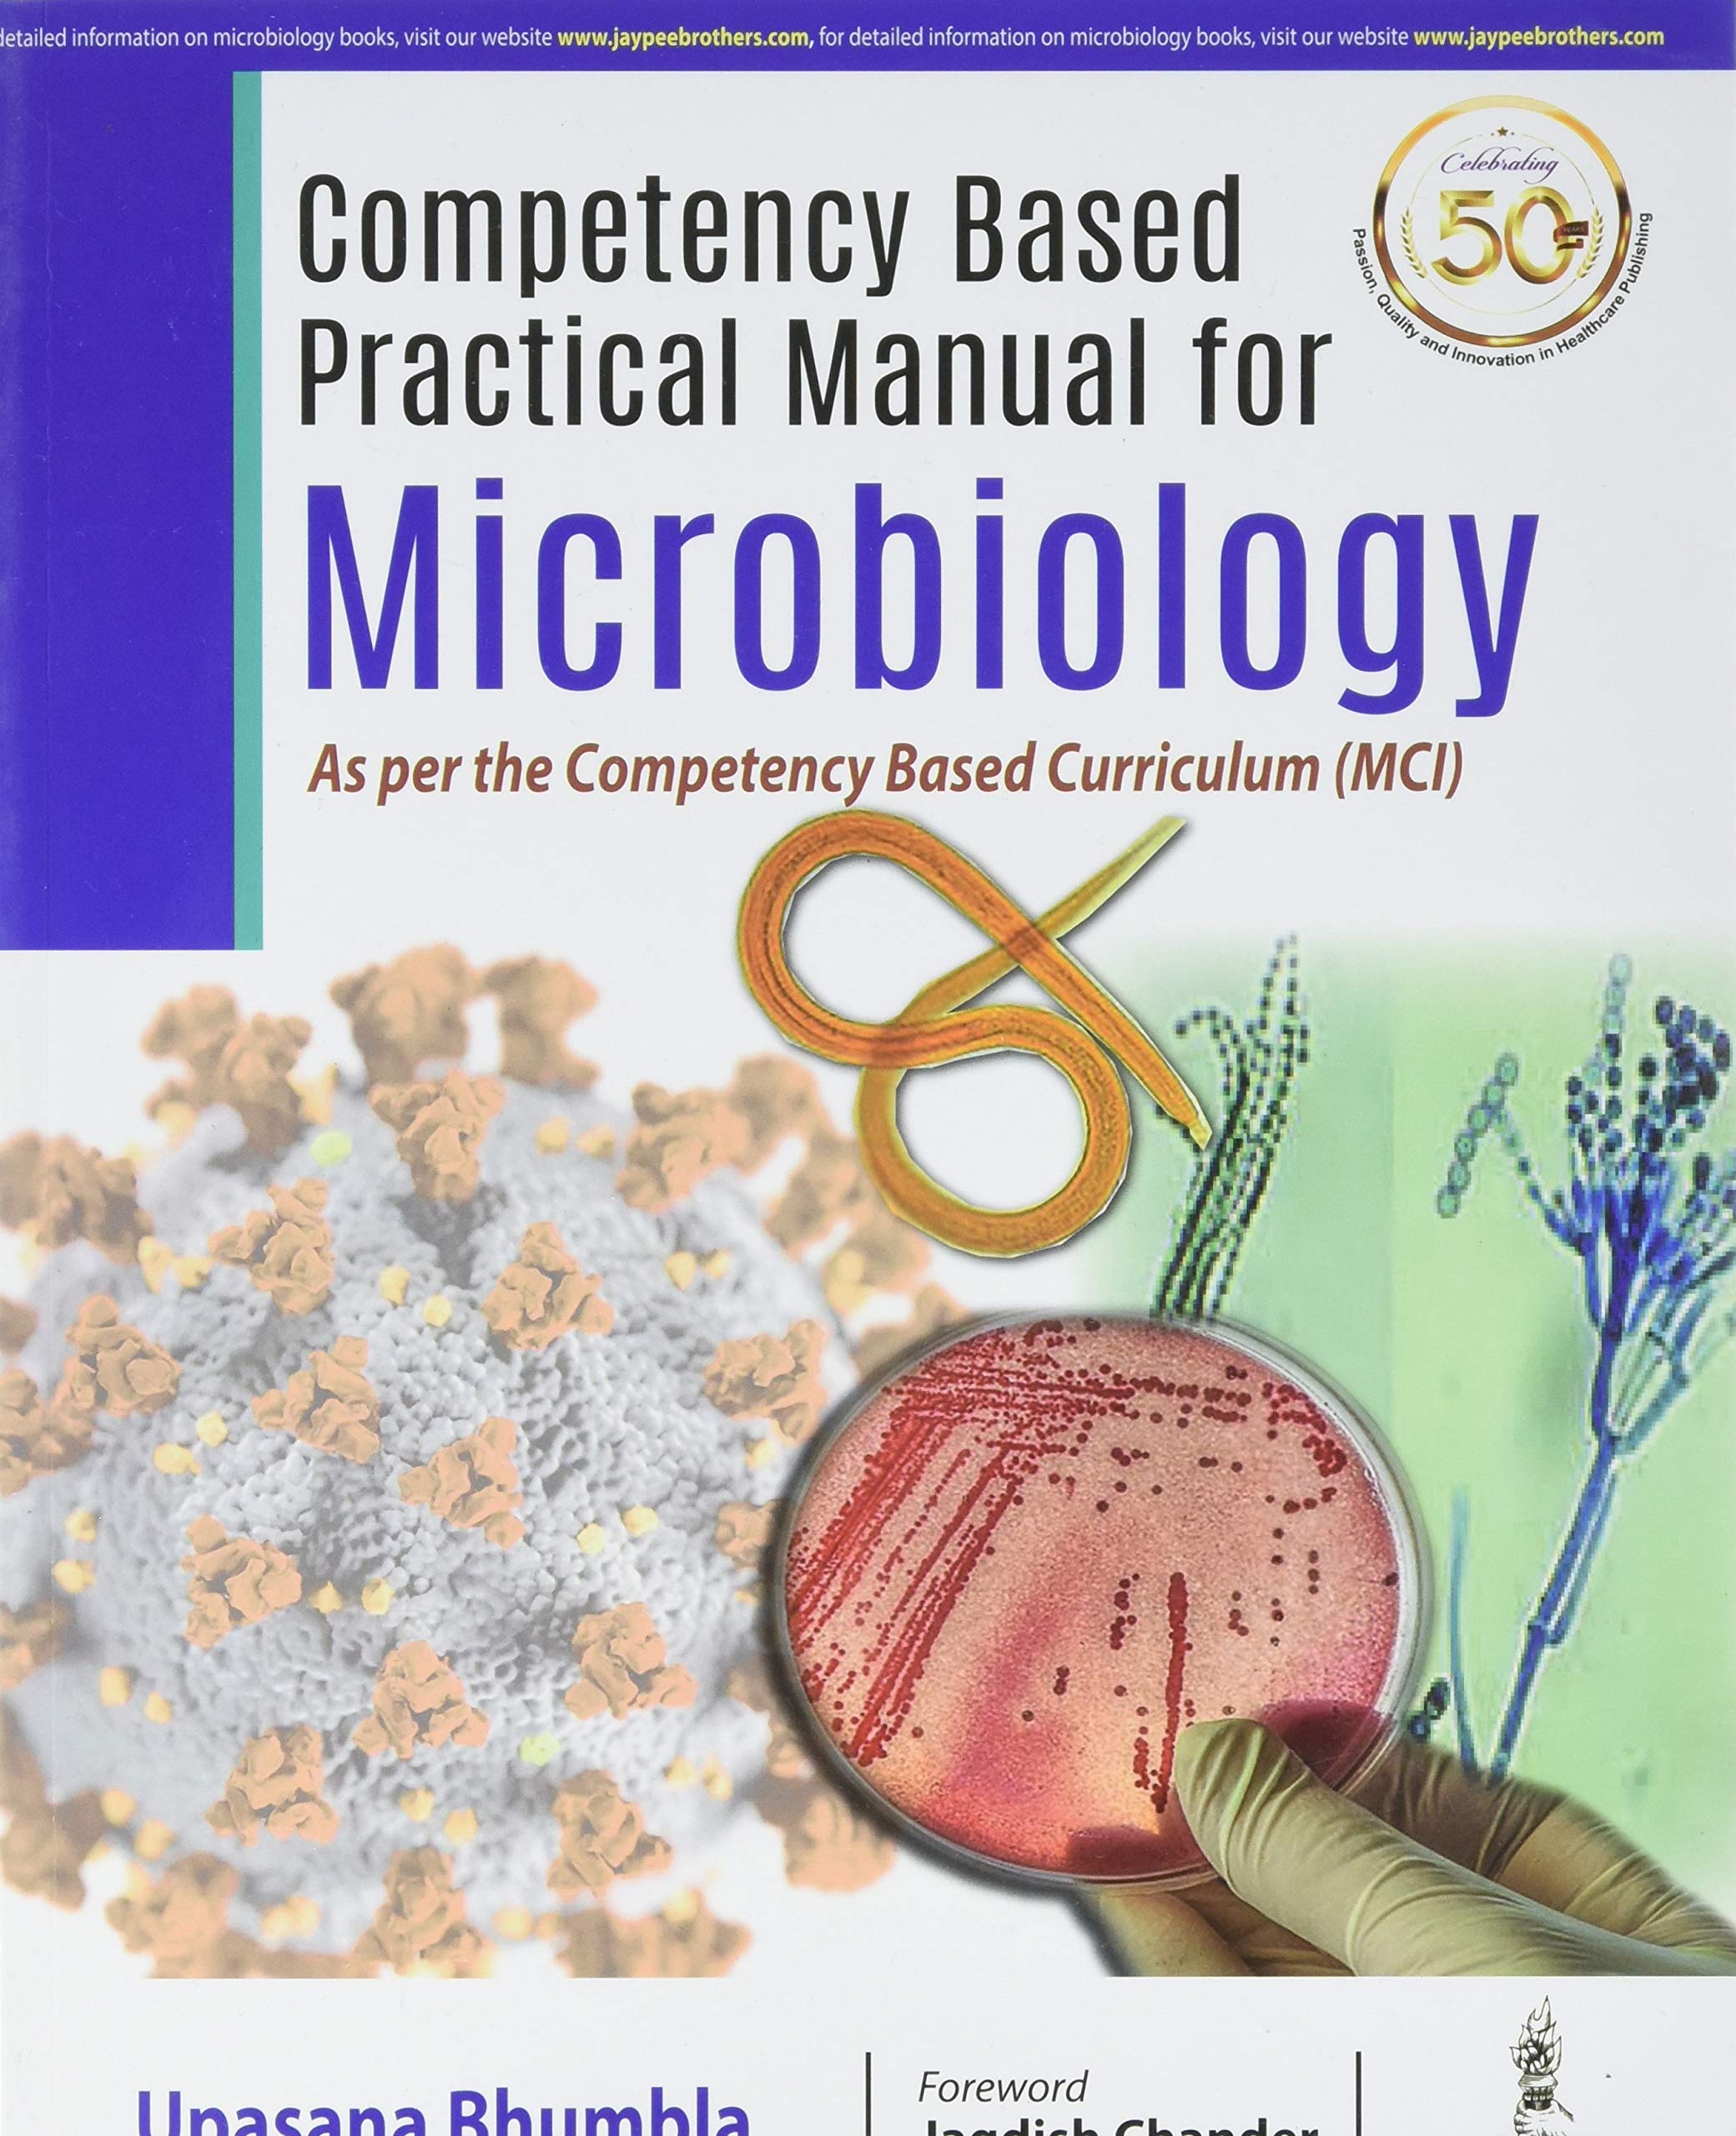 Competency Based Practical Manual For Microbiology As Per The Competencey Based Curriculum (Mci)